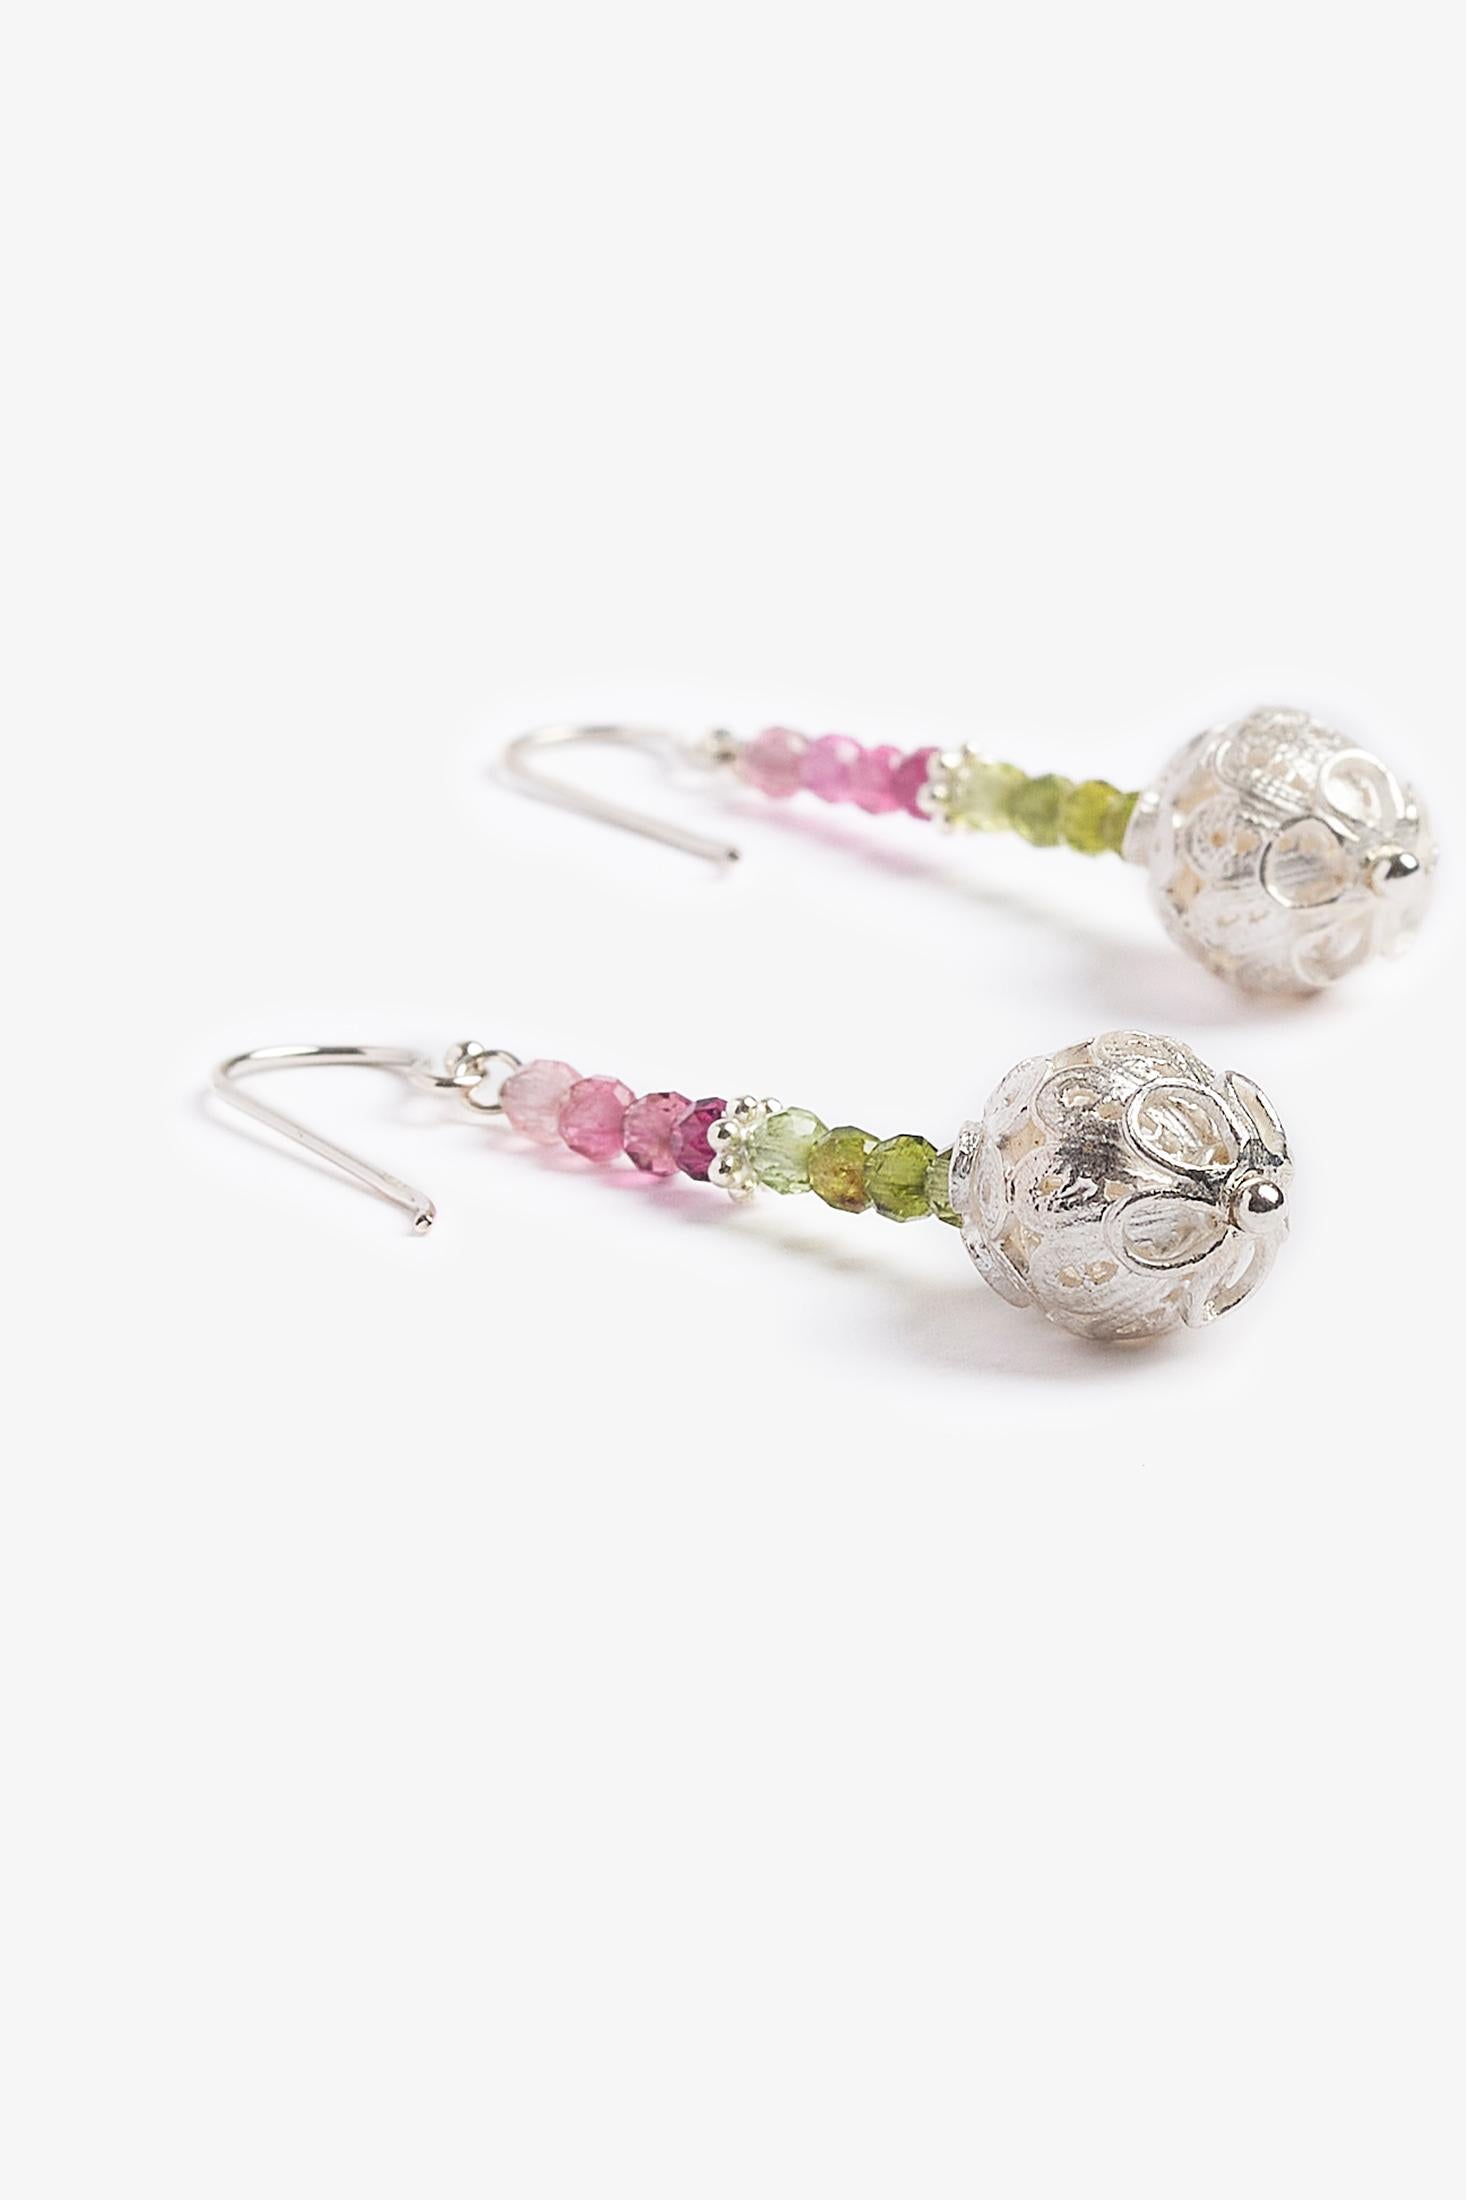 Rainbow tourmaline is a precious and protective stone.  Its vibrant colors represent that of a rainbow.  It is a stone that promotes joy and happiness and is also known for protection and restoring balance.  The unique sterling silver ornate balls